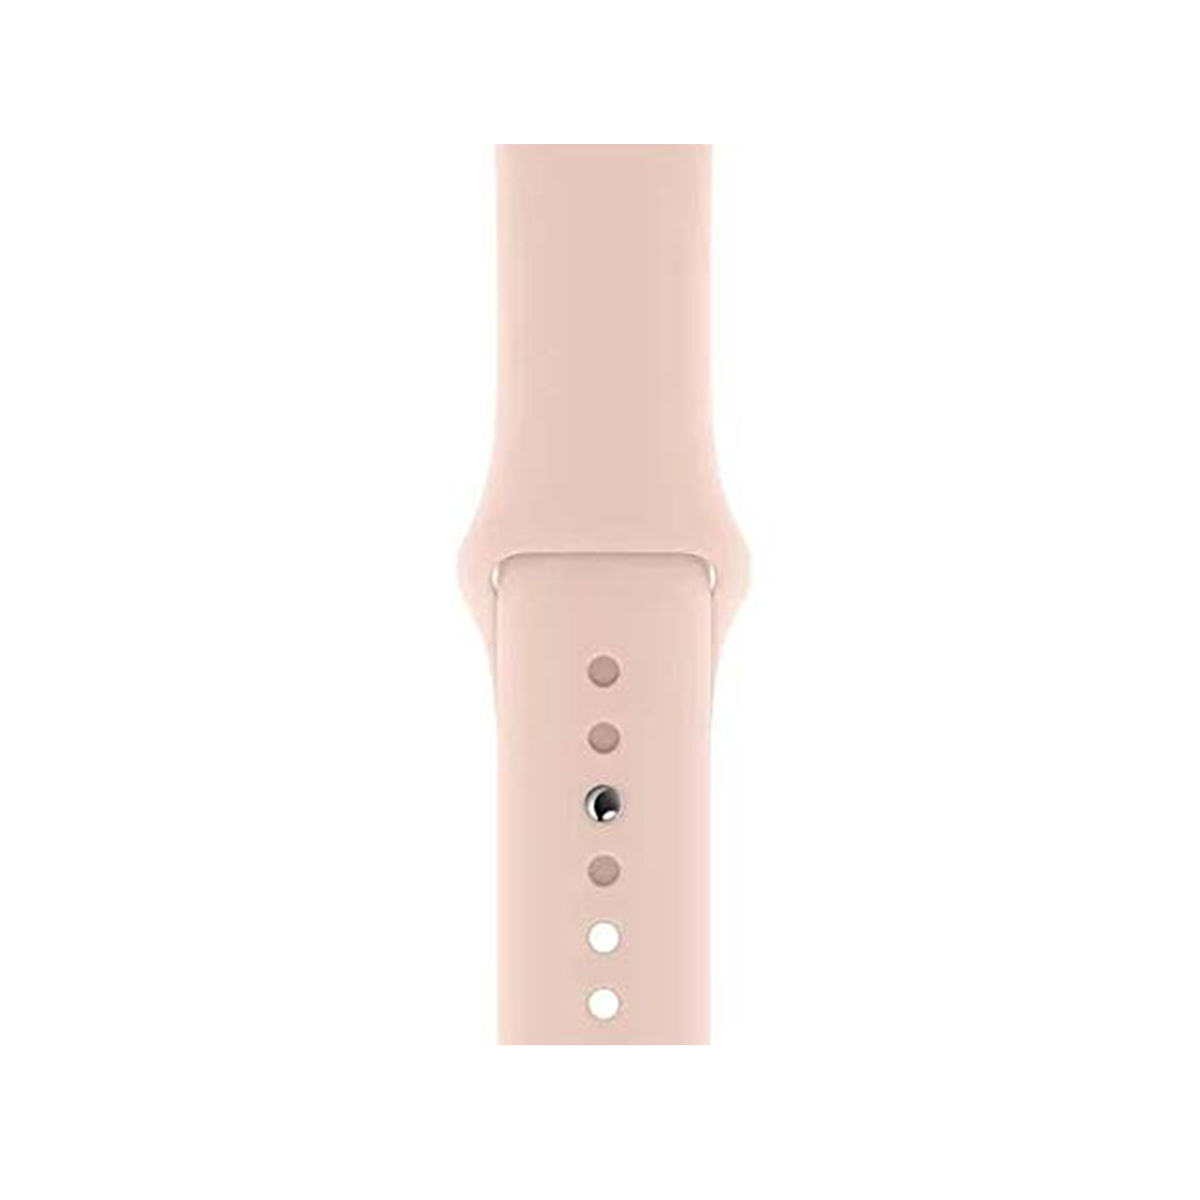 Apple Watch Series 5 GPS + Cellular MWX22AE 40mm Gold Aluminium Case with Pink Sand Sport Band